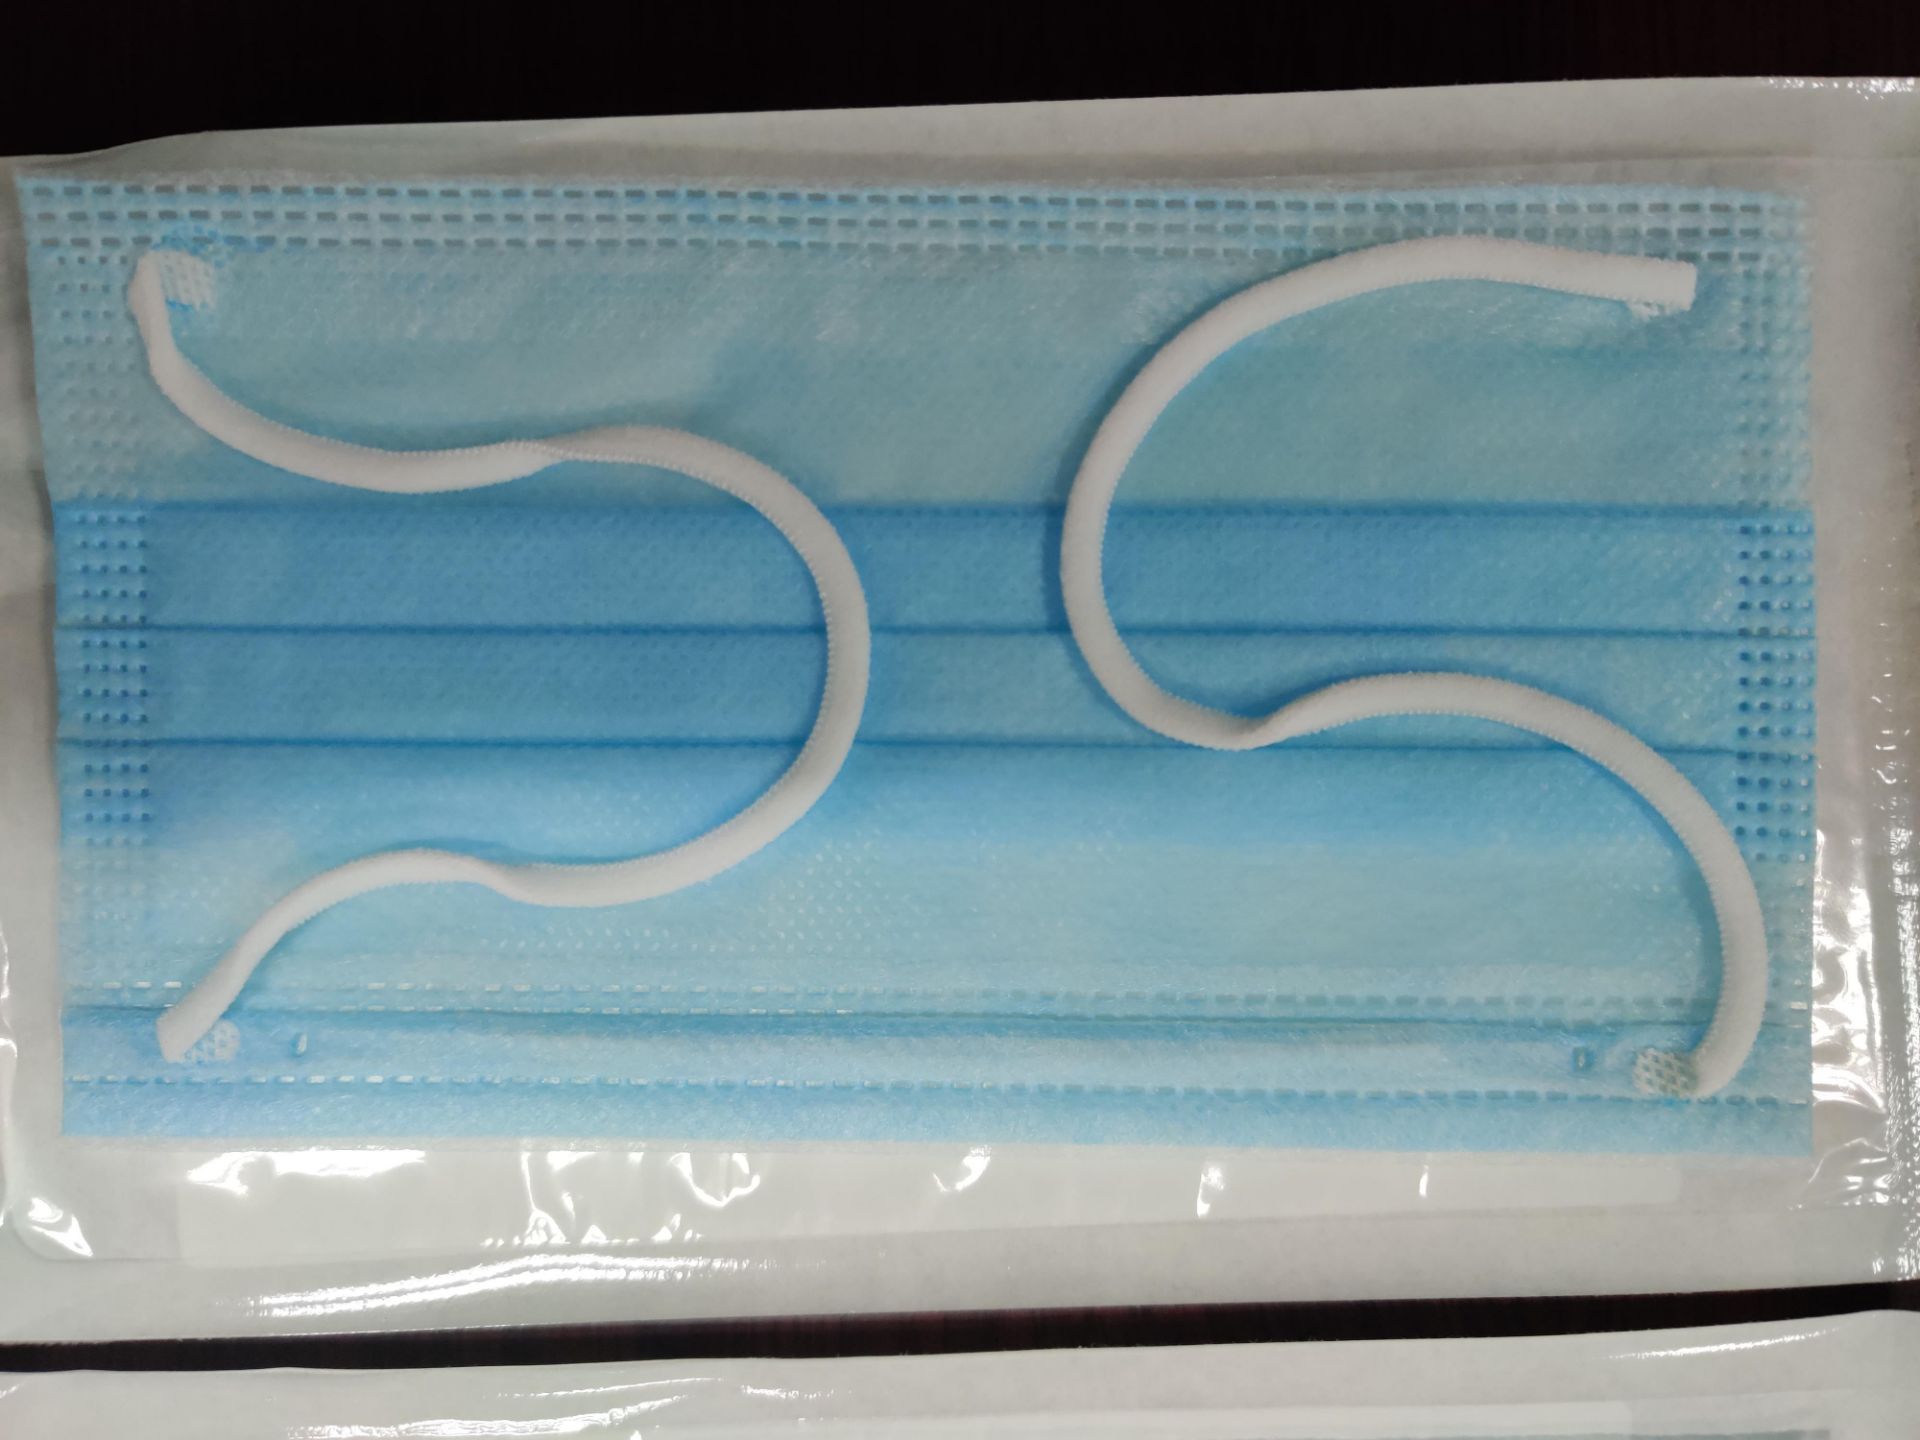 Type IIR Triple Layer Surgical Face Masks (2000pcs) UK delivery included - Image 2 of 8